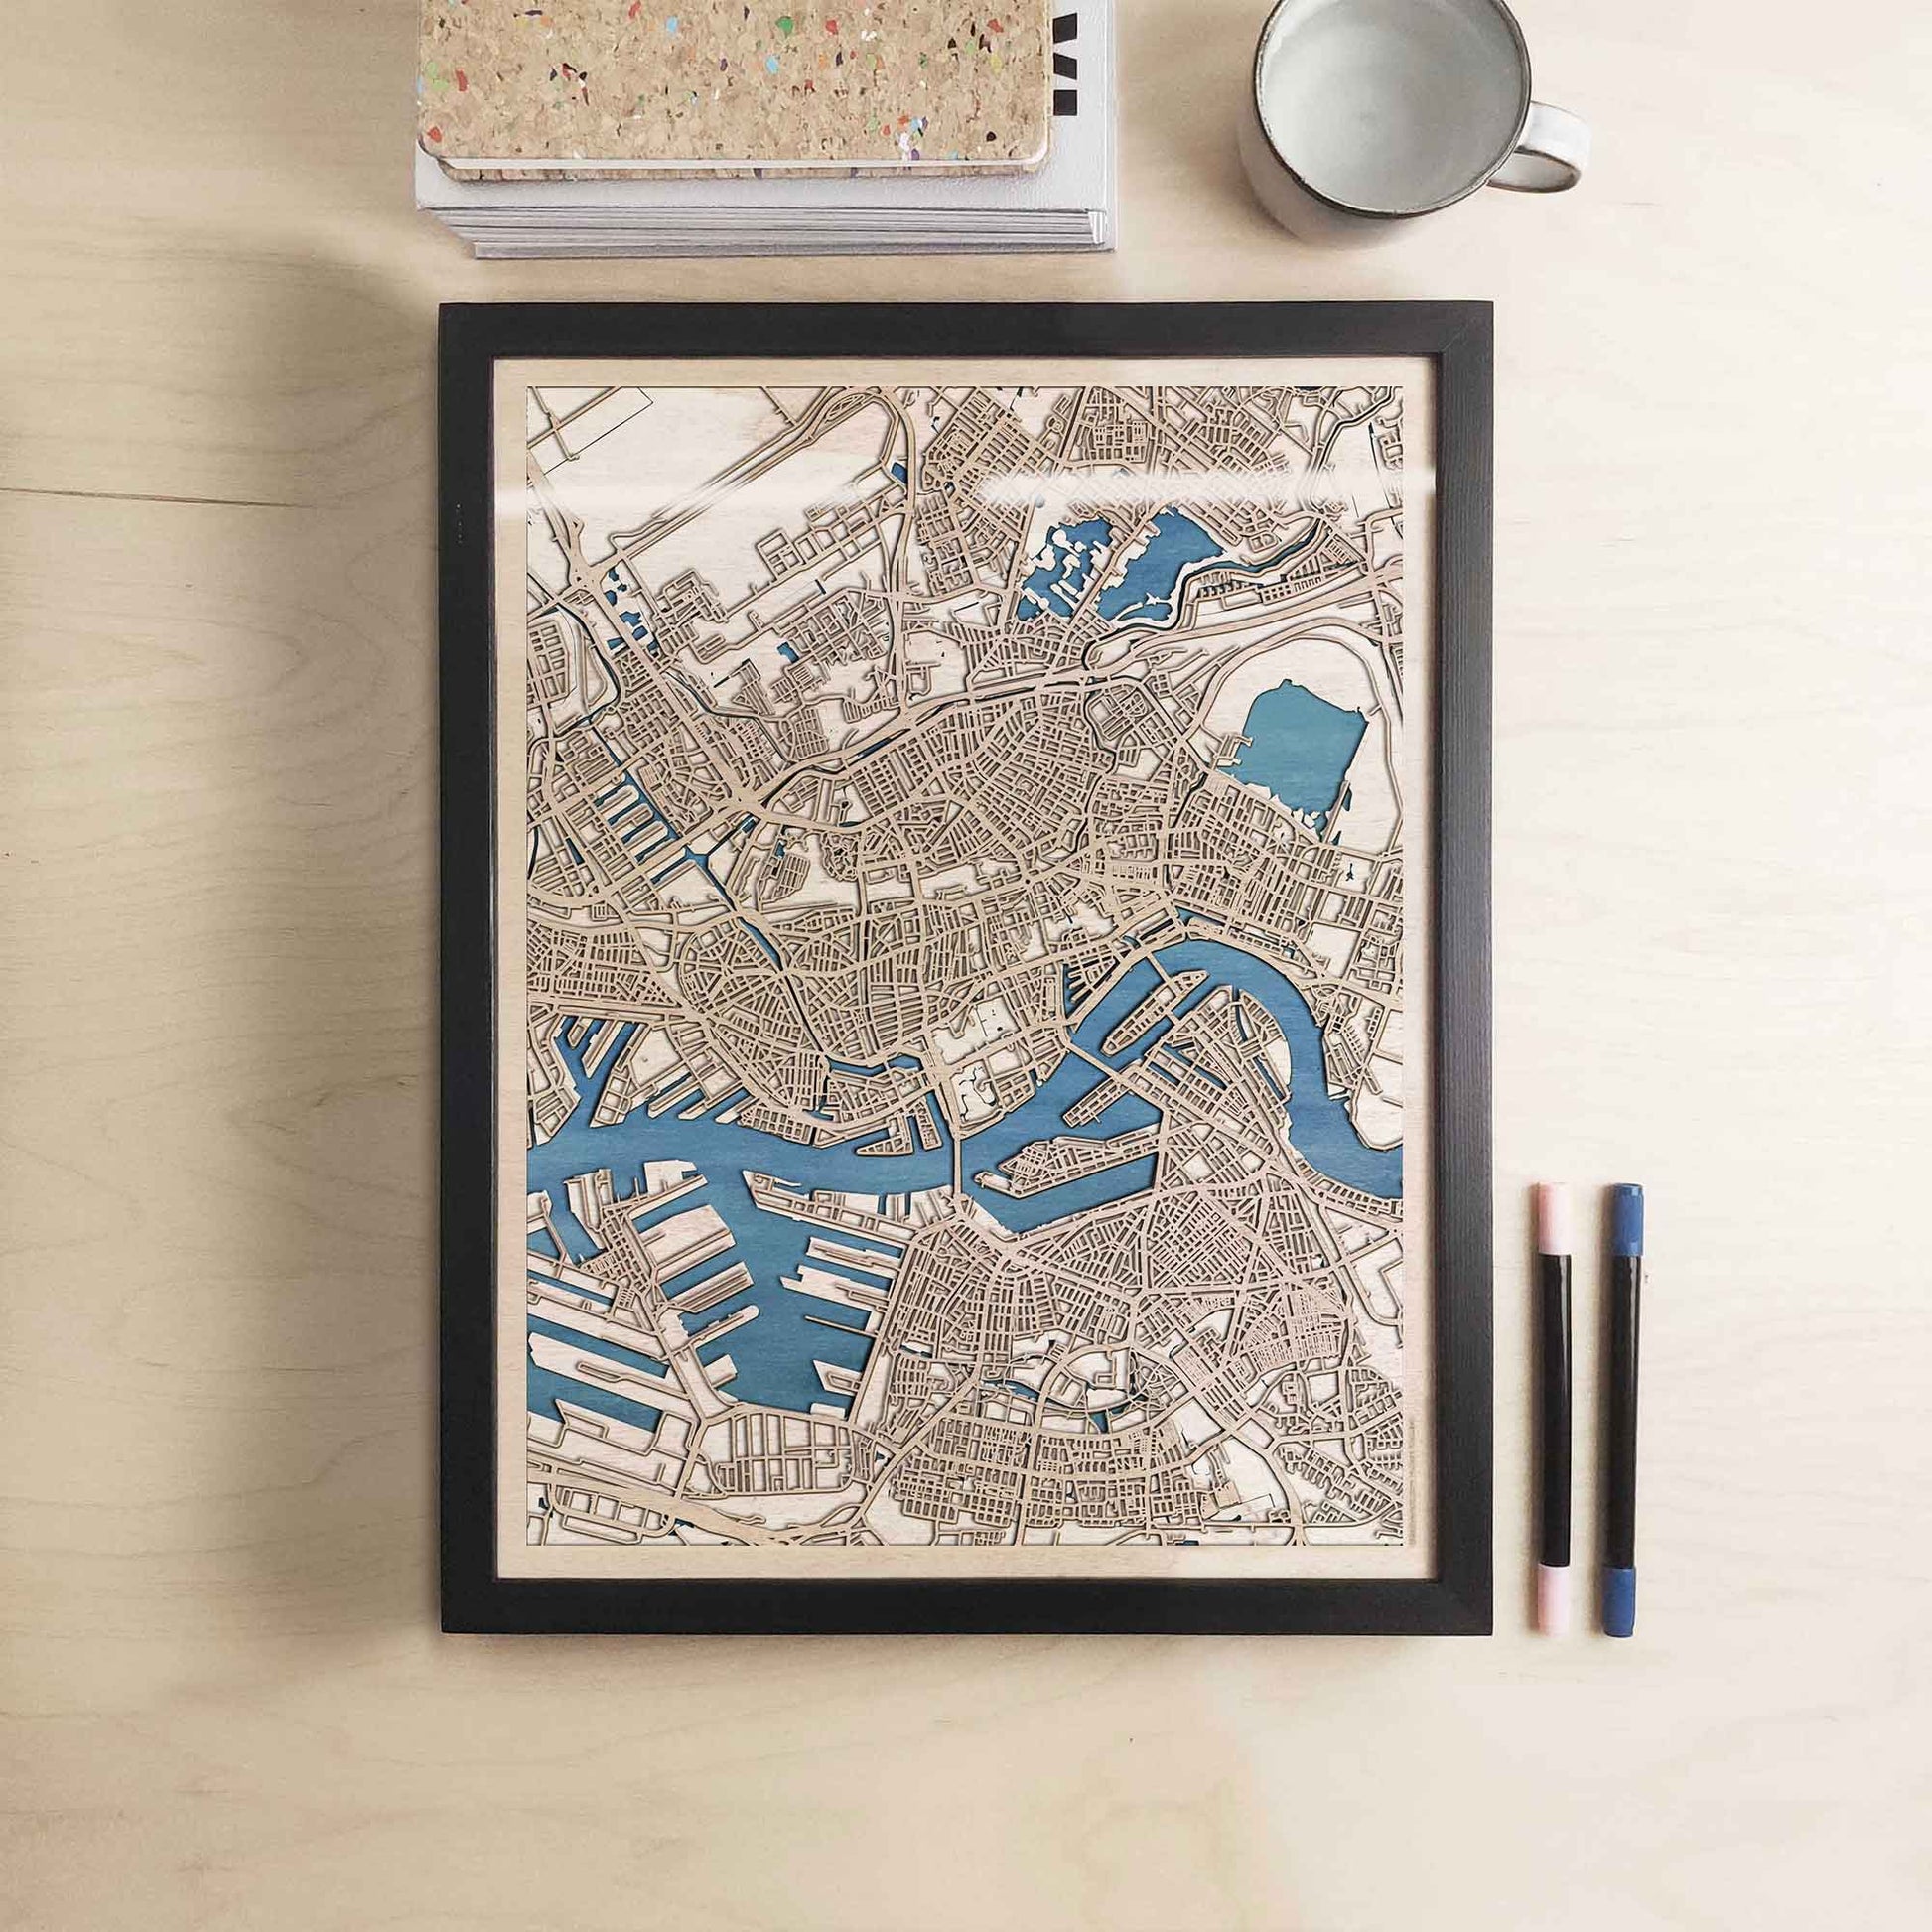 Rotterdam Wooden Map by CityWood - Custom Wood Map Art - Unique Laser Cut Engraved - Anniversary Gift